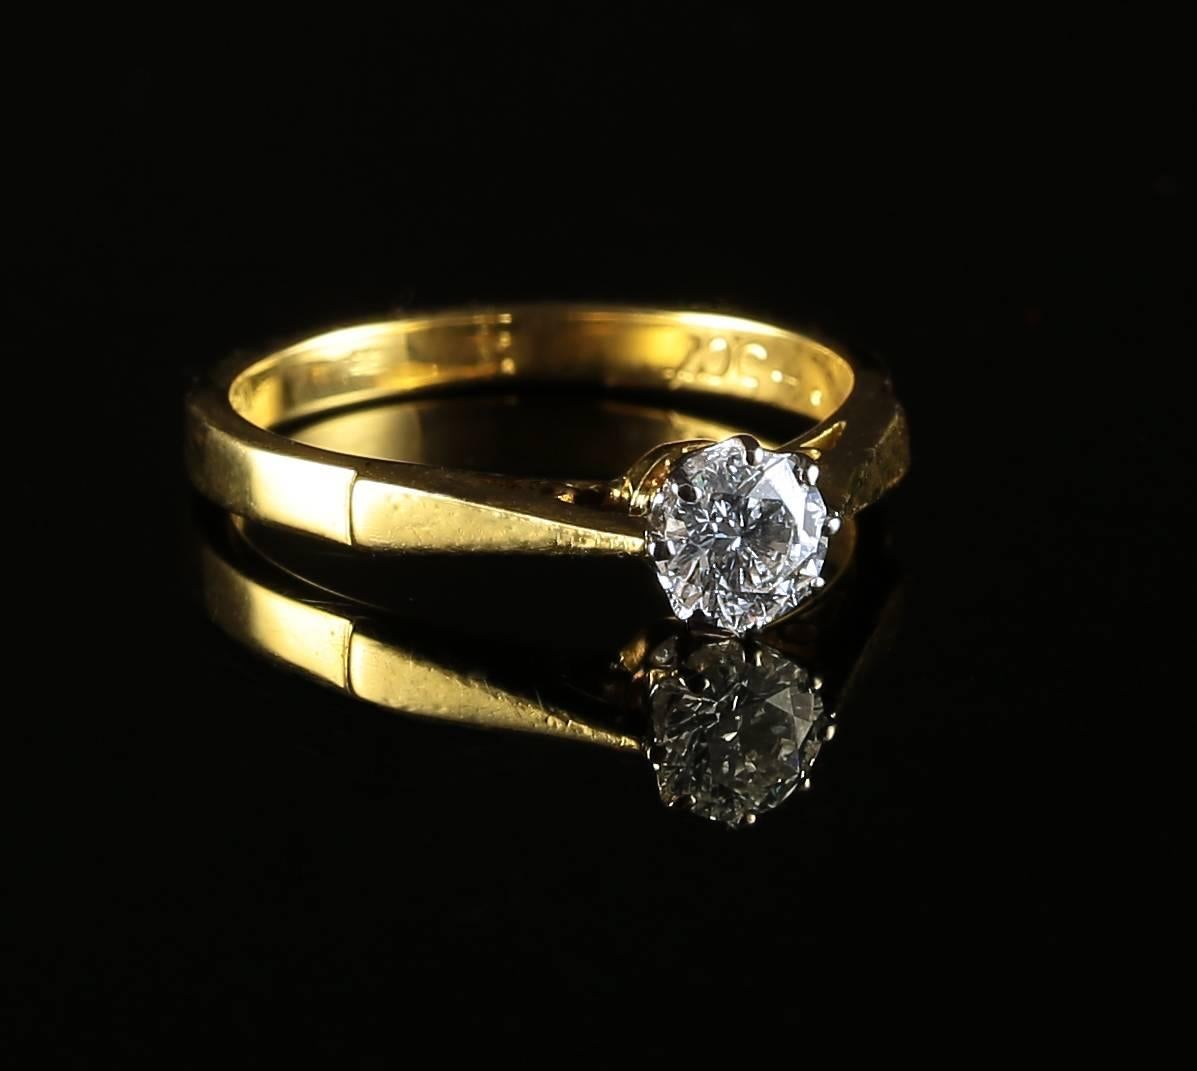 This beautiful 18ct yellow gold ring is set with a 0.45ct Old Cut Diamond 
Circa 1900

The Diamond is beautiful, full of sparkle VS 1 H Colour.
The Diamond weight is stamped inside the shank 0.45ct and the old 18ct stamp too.

The diamond sparkles